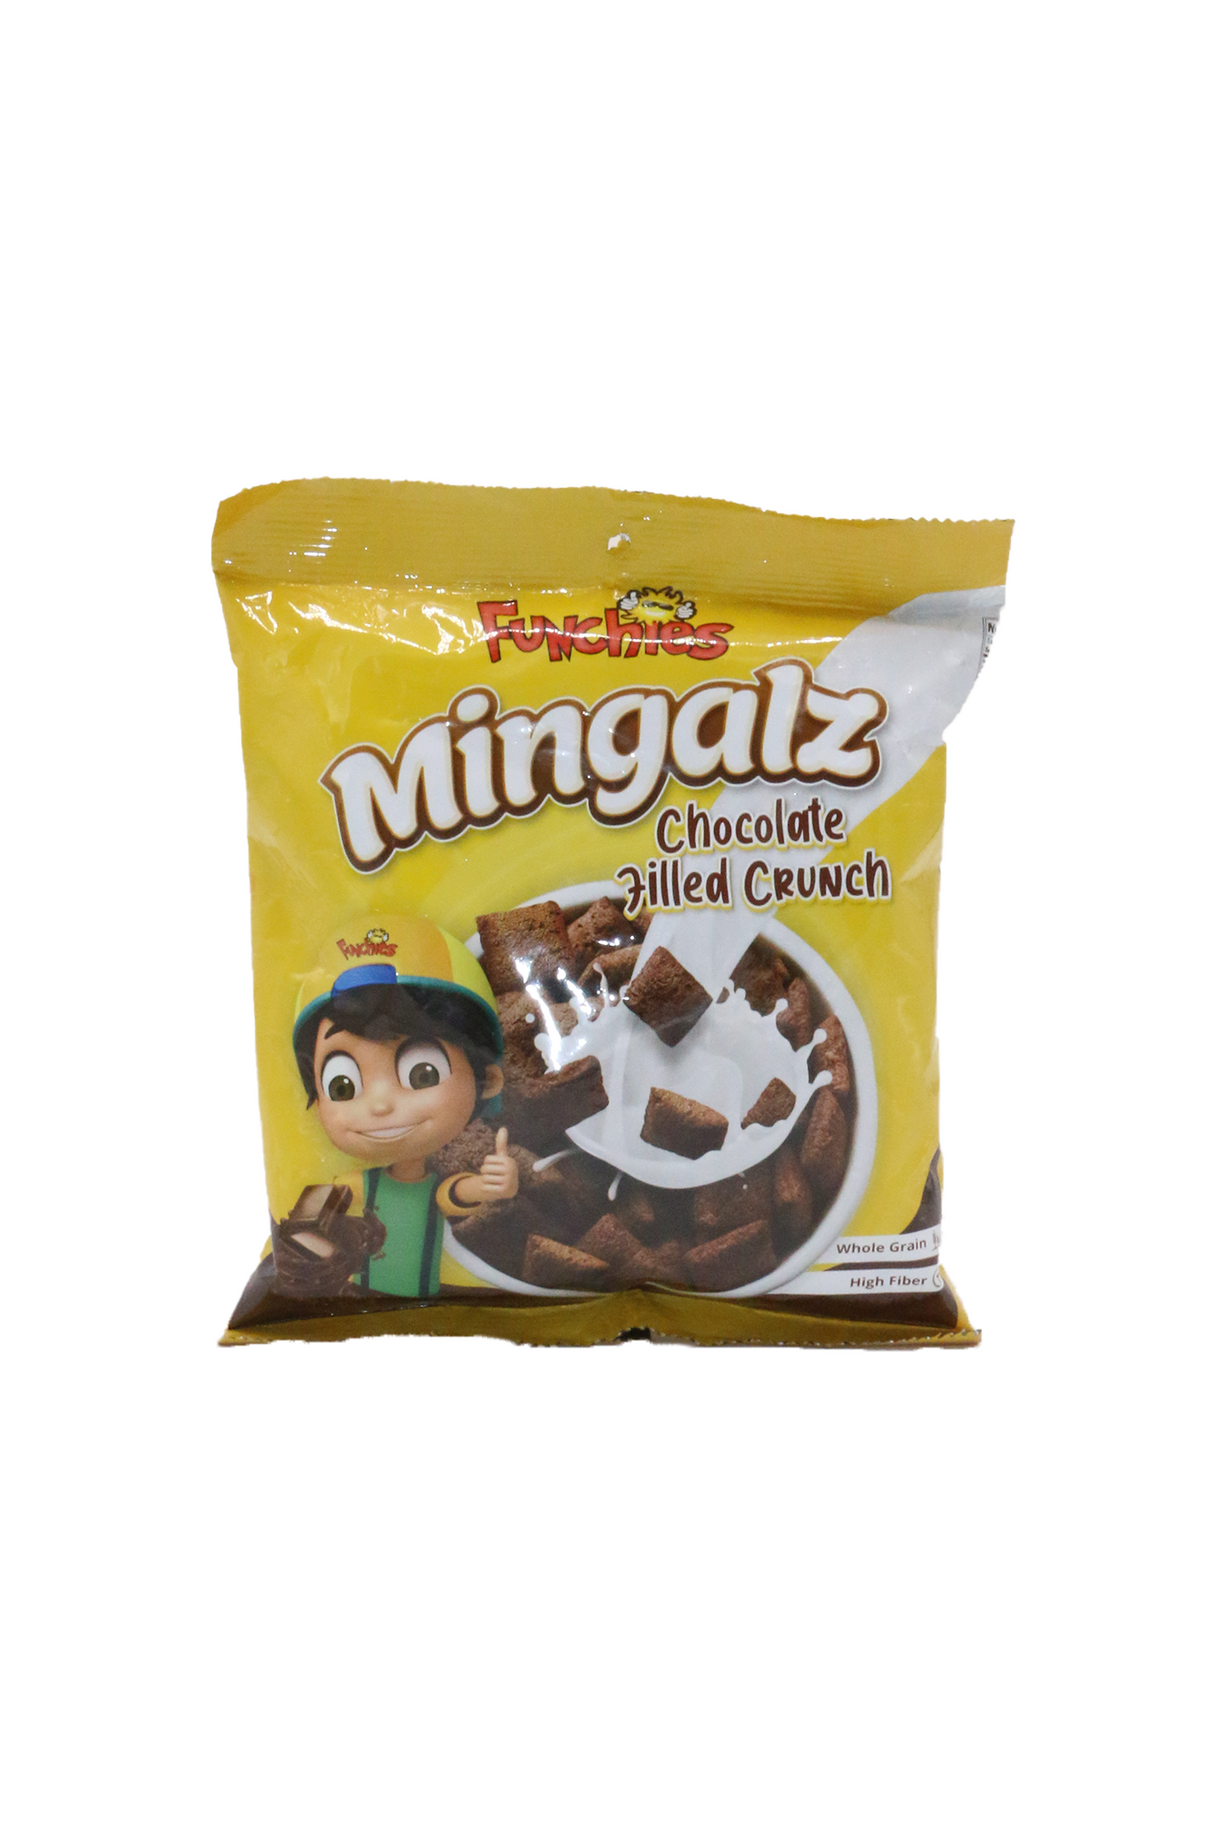 funchies mingals chocolate filled crunch 16g